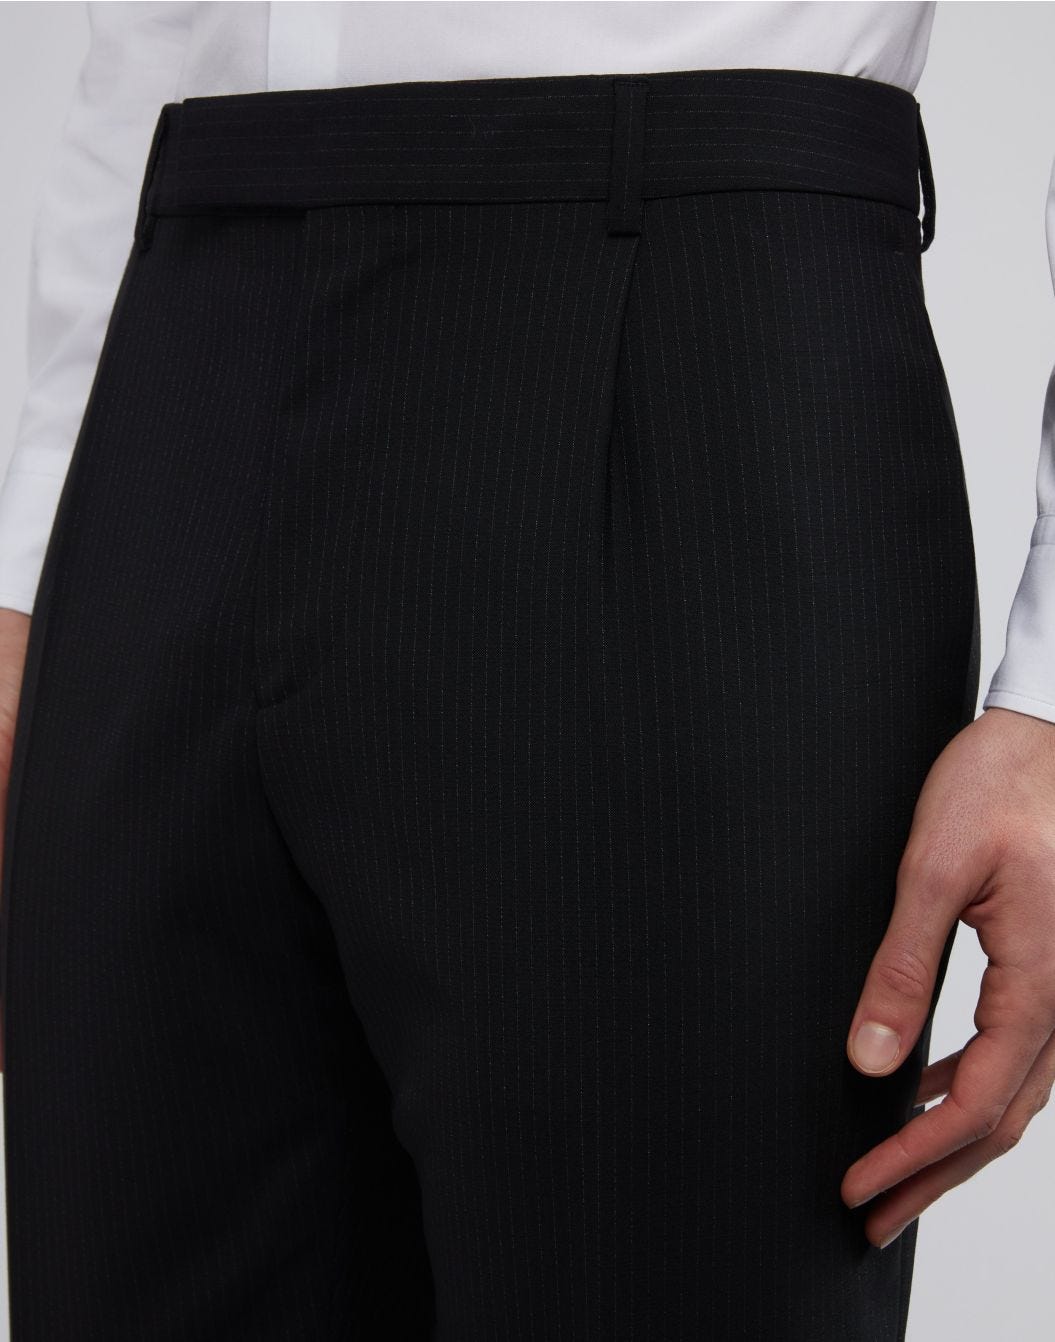 Black trousers with contrasting pinstripes